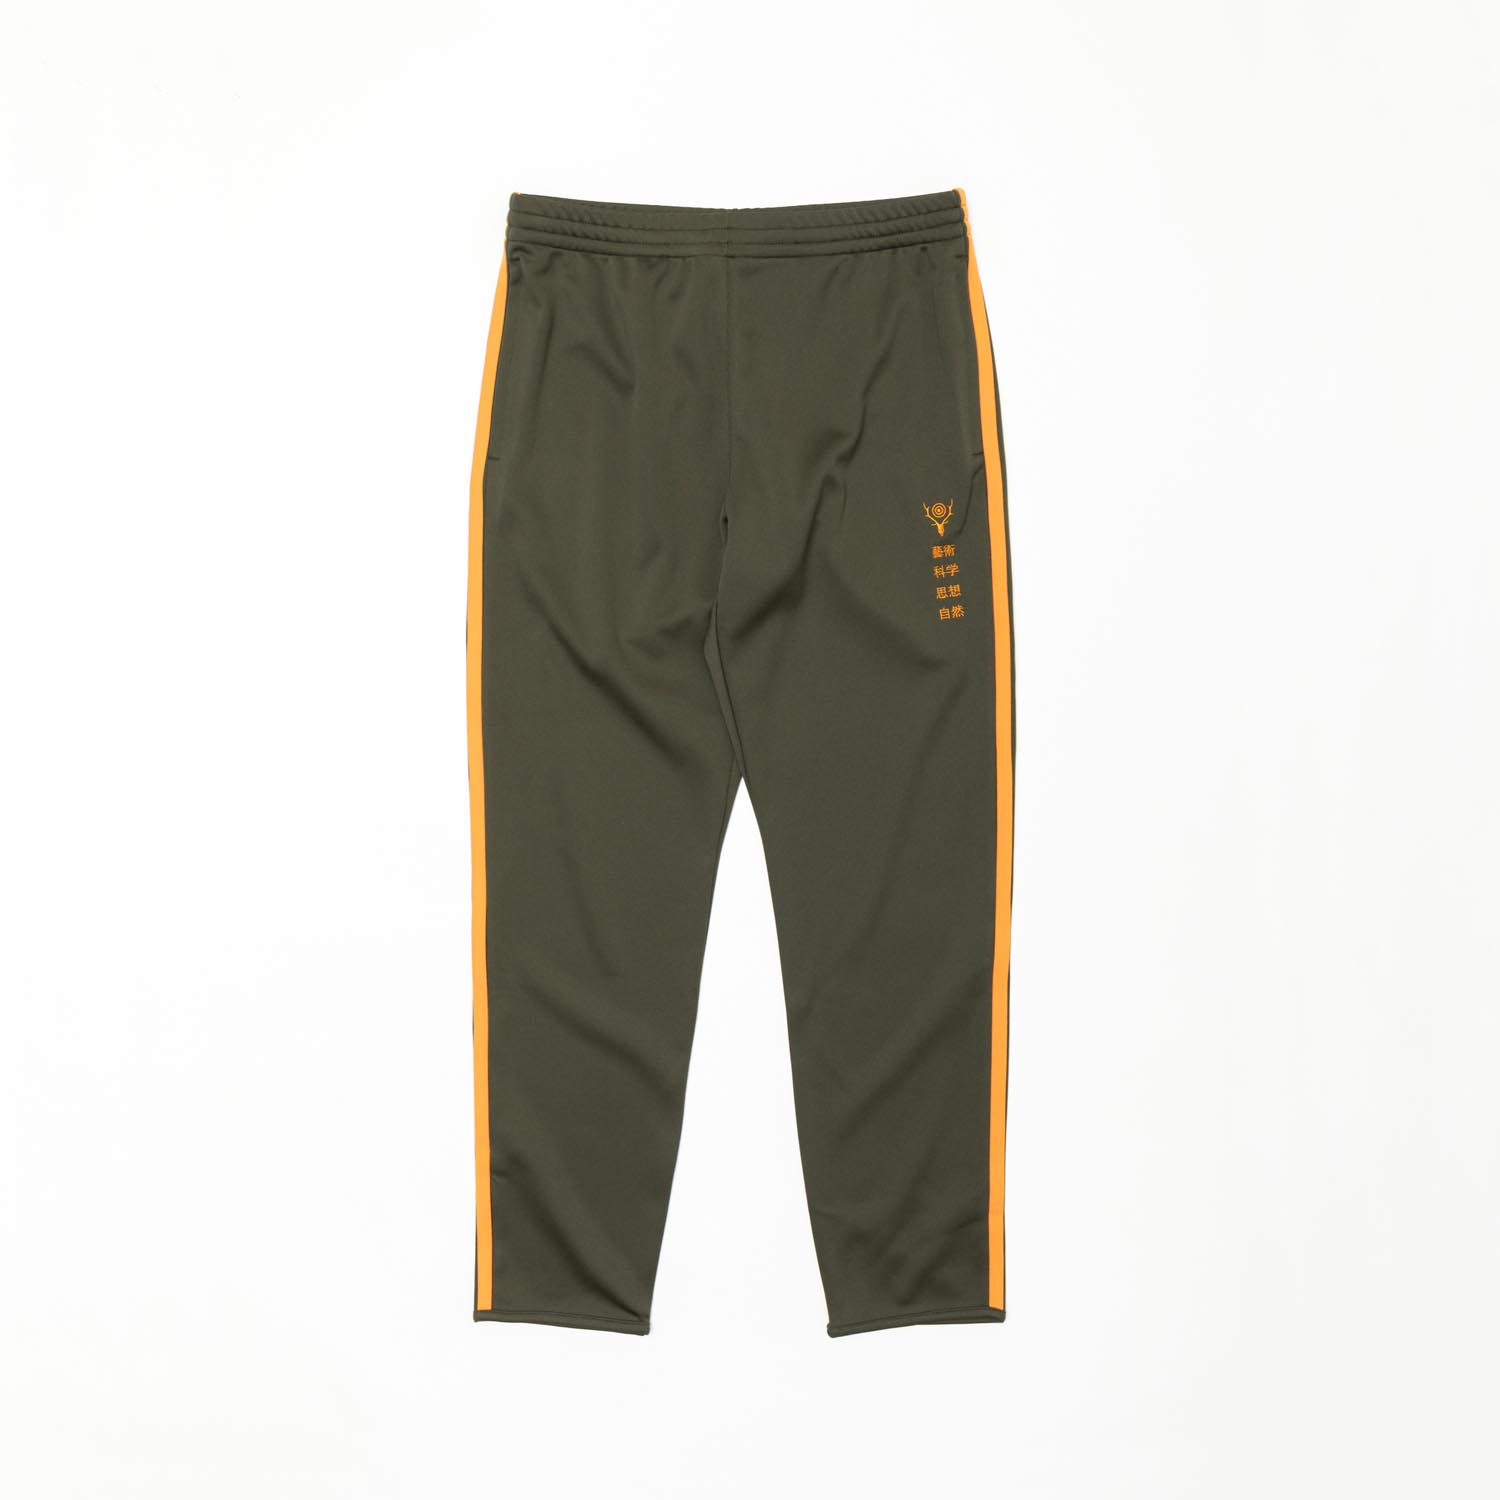 SOUTH2 WEST8 x TACOMA FUJI RECORDS Trainer Pant - Poly Smooth